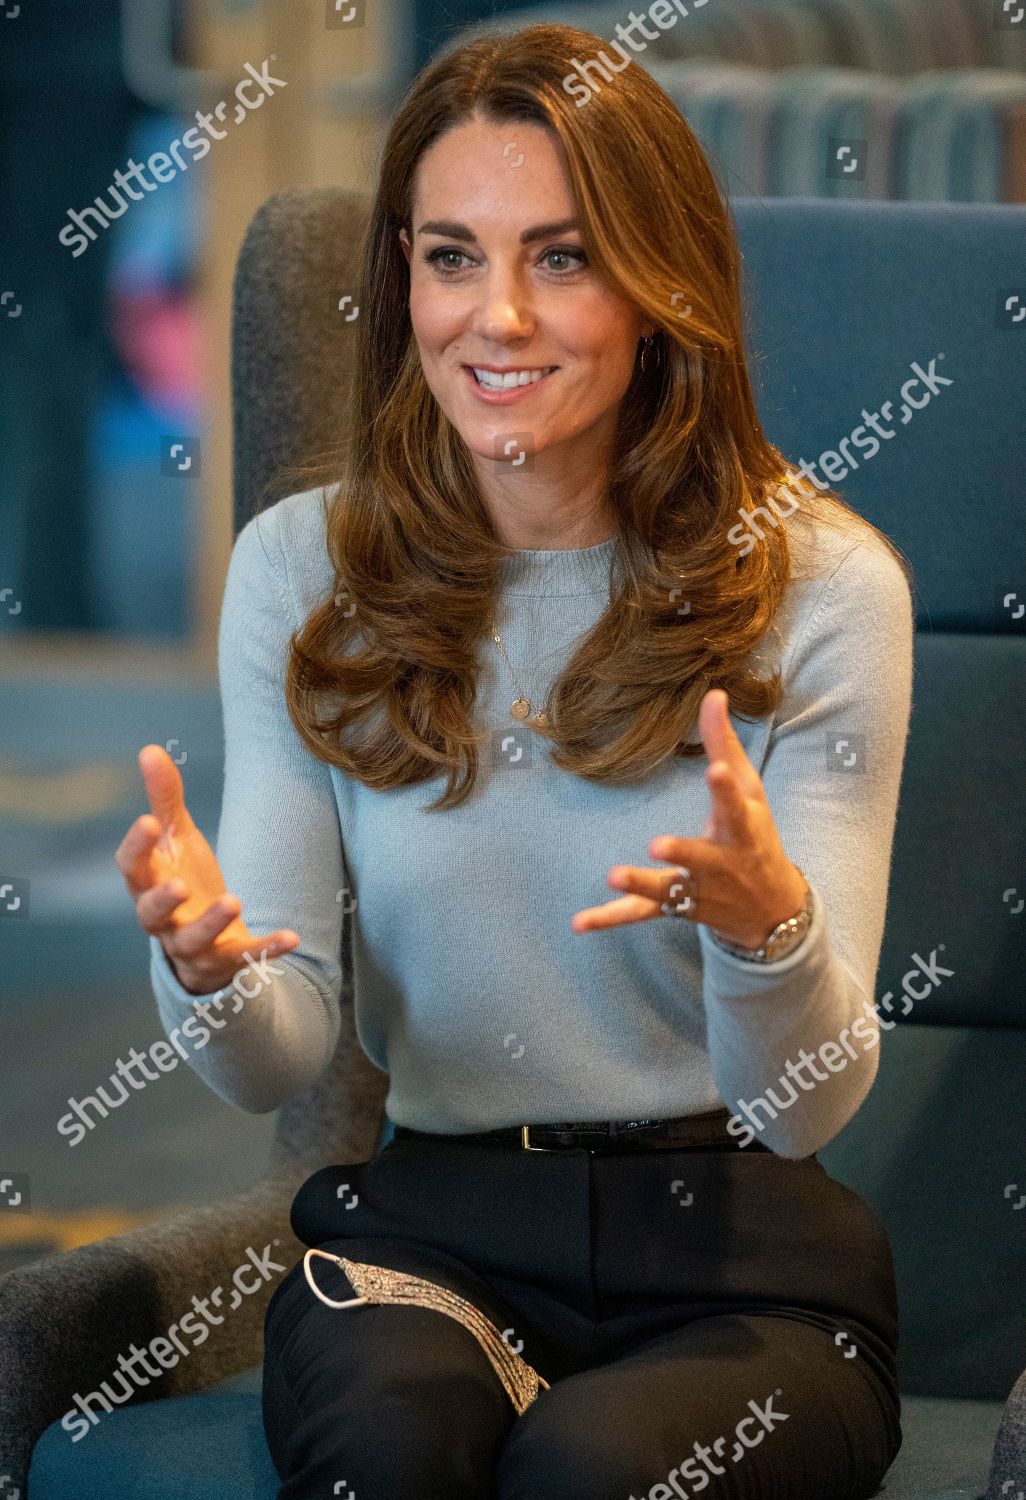 the-duchess-of-cambridge-visits-students-at-the-university-of-derby-uk-shutterstock-editorial-10931996u.jpg